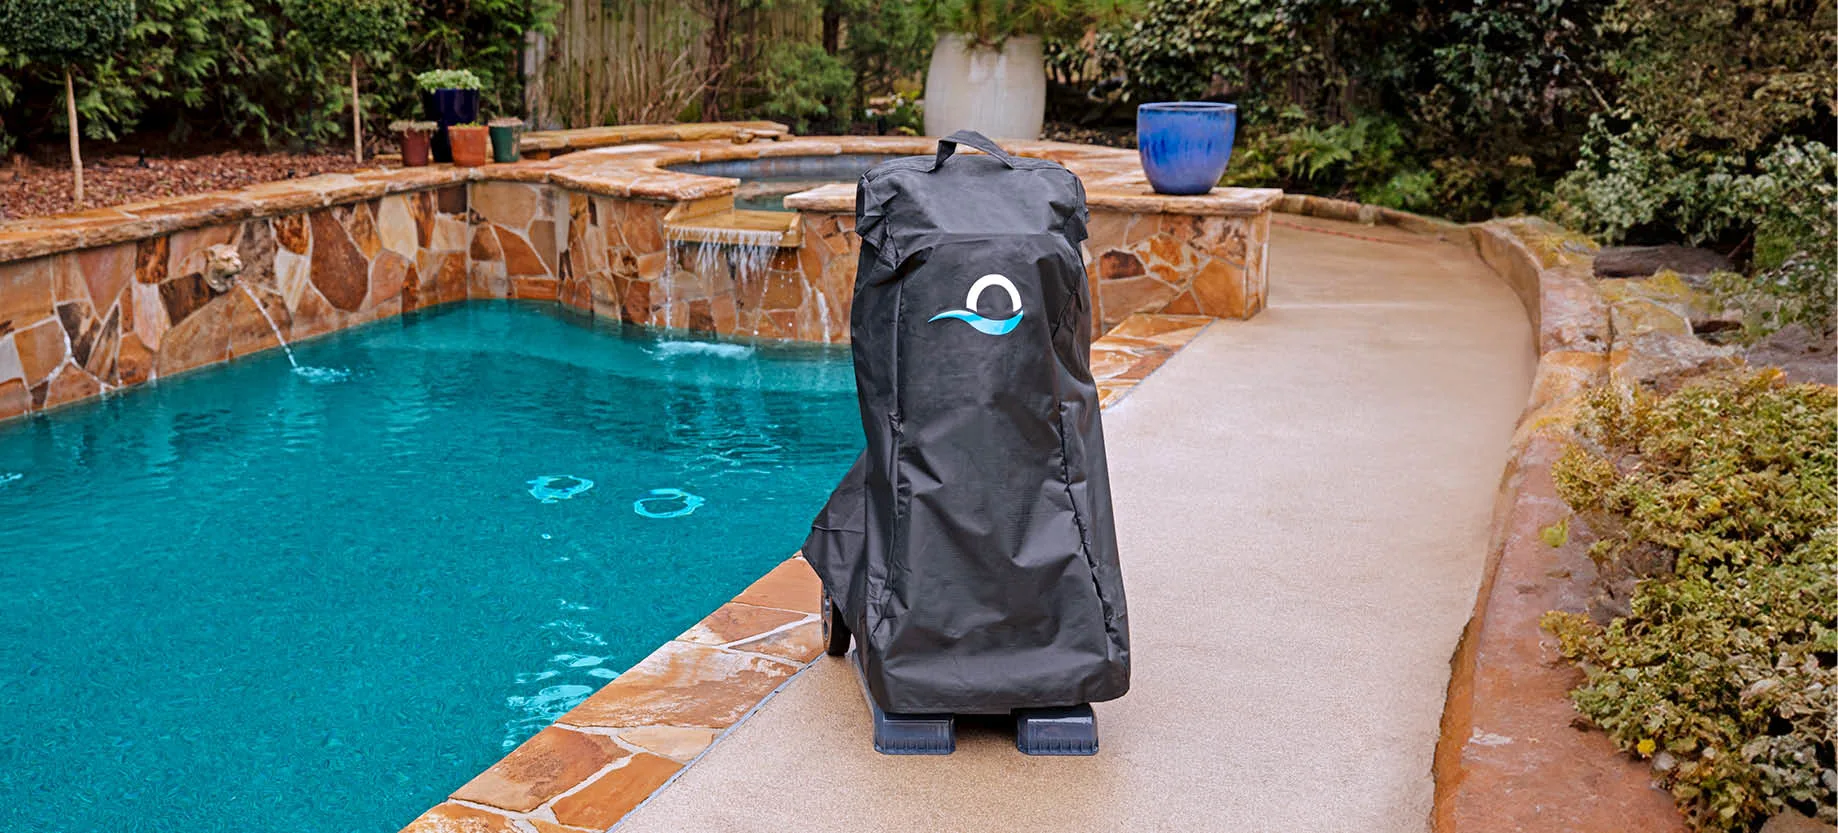 Dolphin caddy cover for winter storage